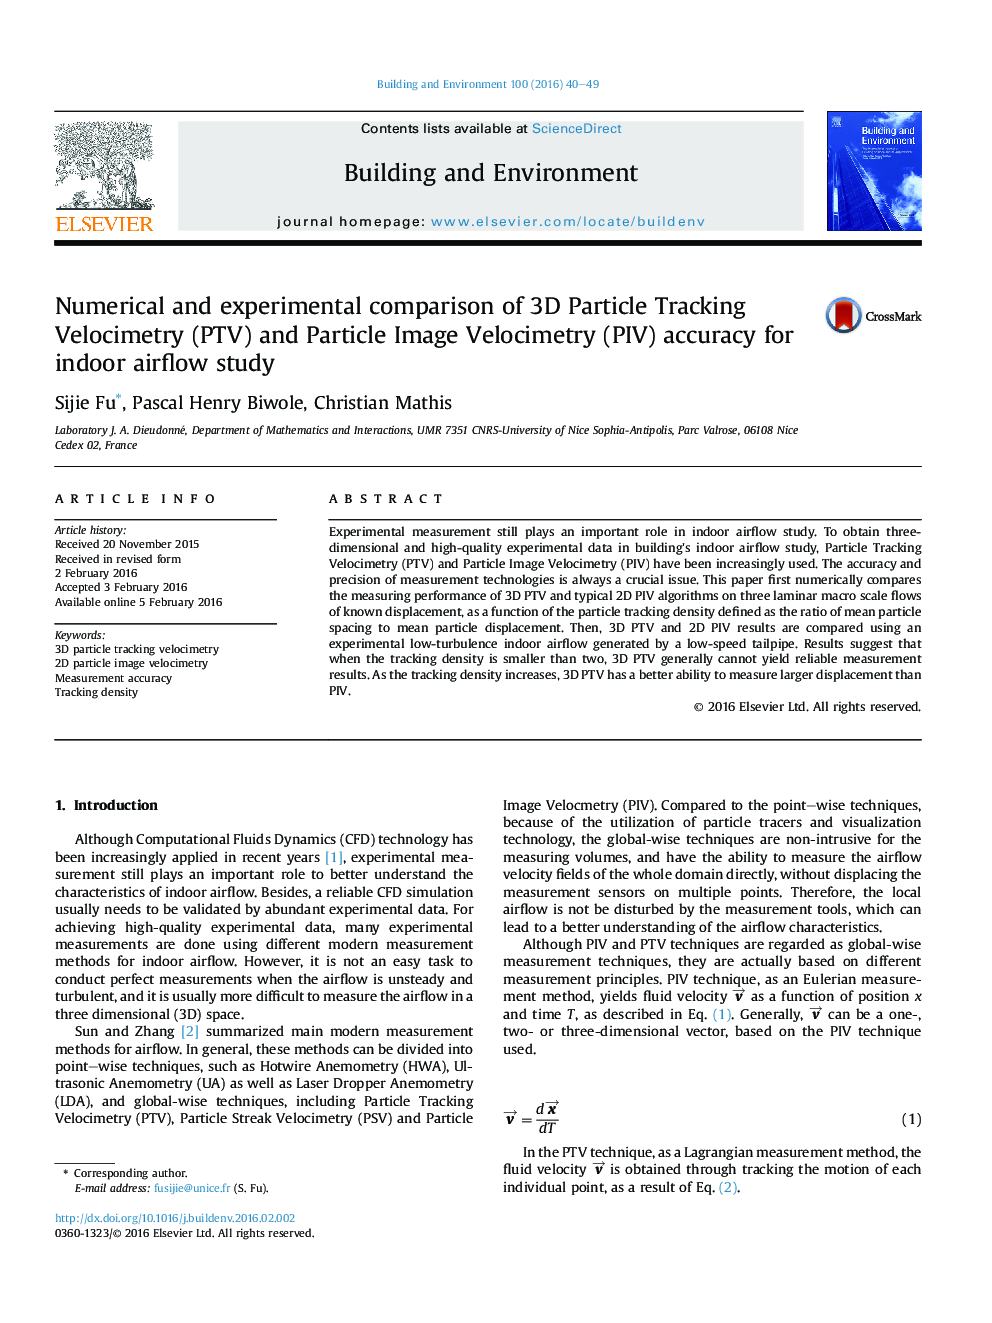 Numerical and experimental comparison of 3D Particle Tracking Velocimetry (PTV) and Particle Image Velocimetry (PIV) accuracy for indoor airflow study